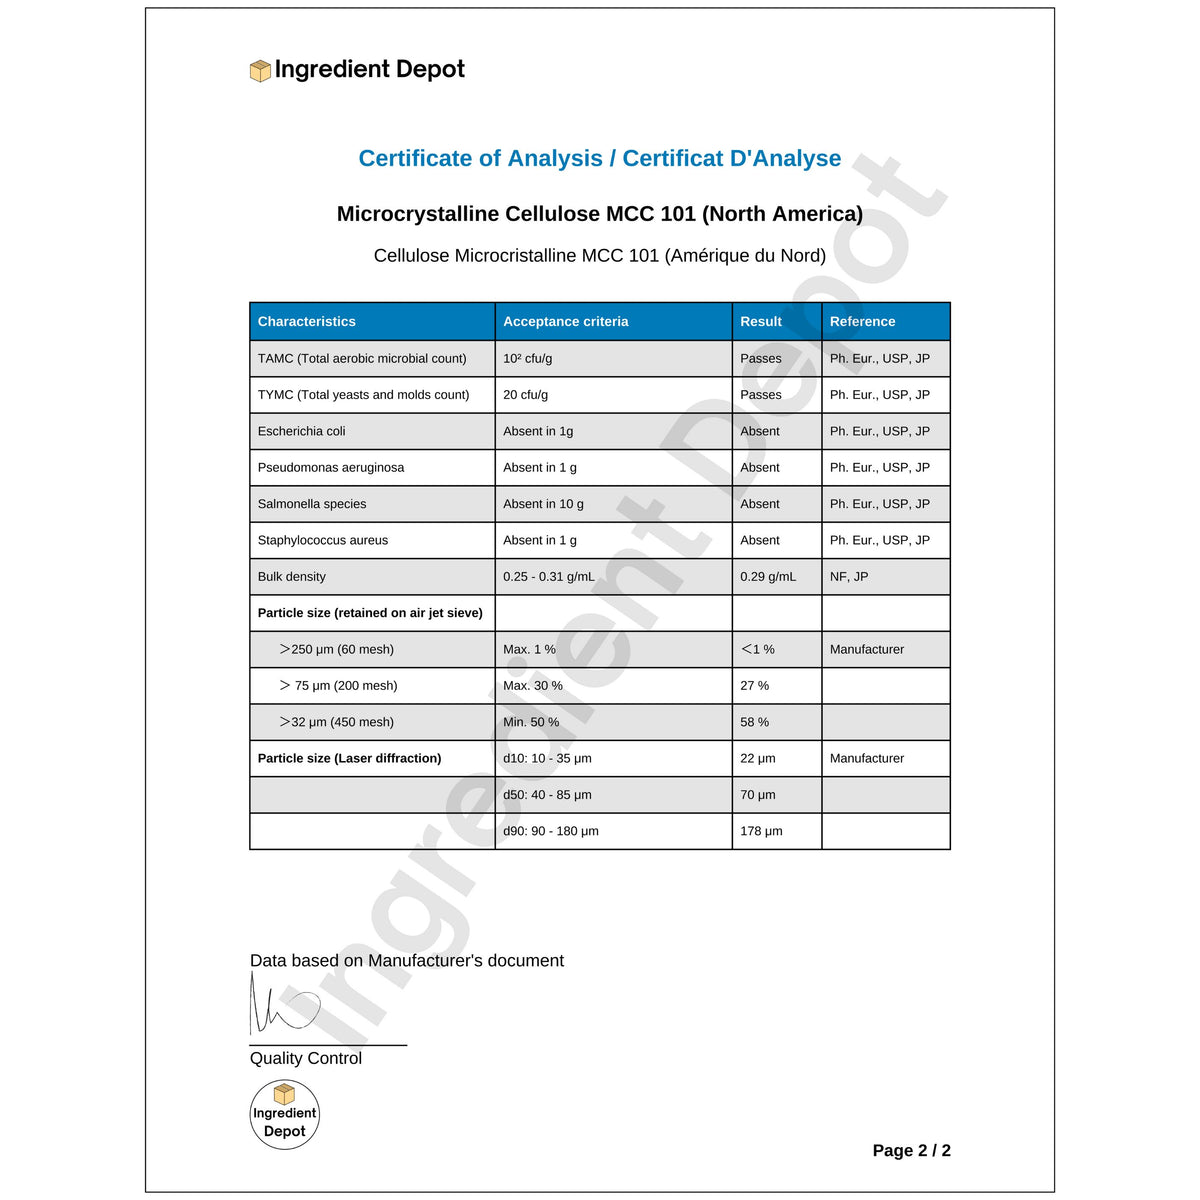 MCC 101 Microcrystalline Cellulose 20 kgs from North America COA Page 2 of 2